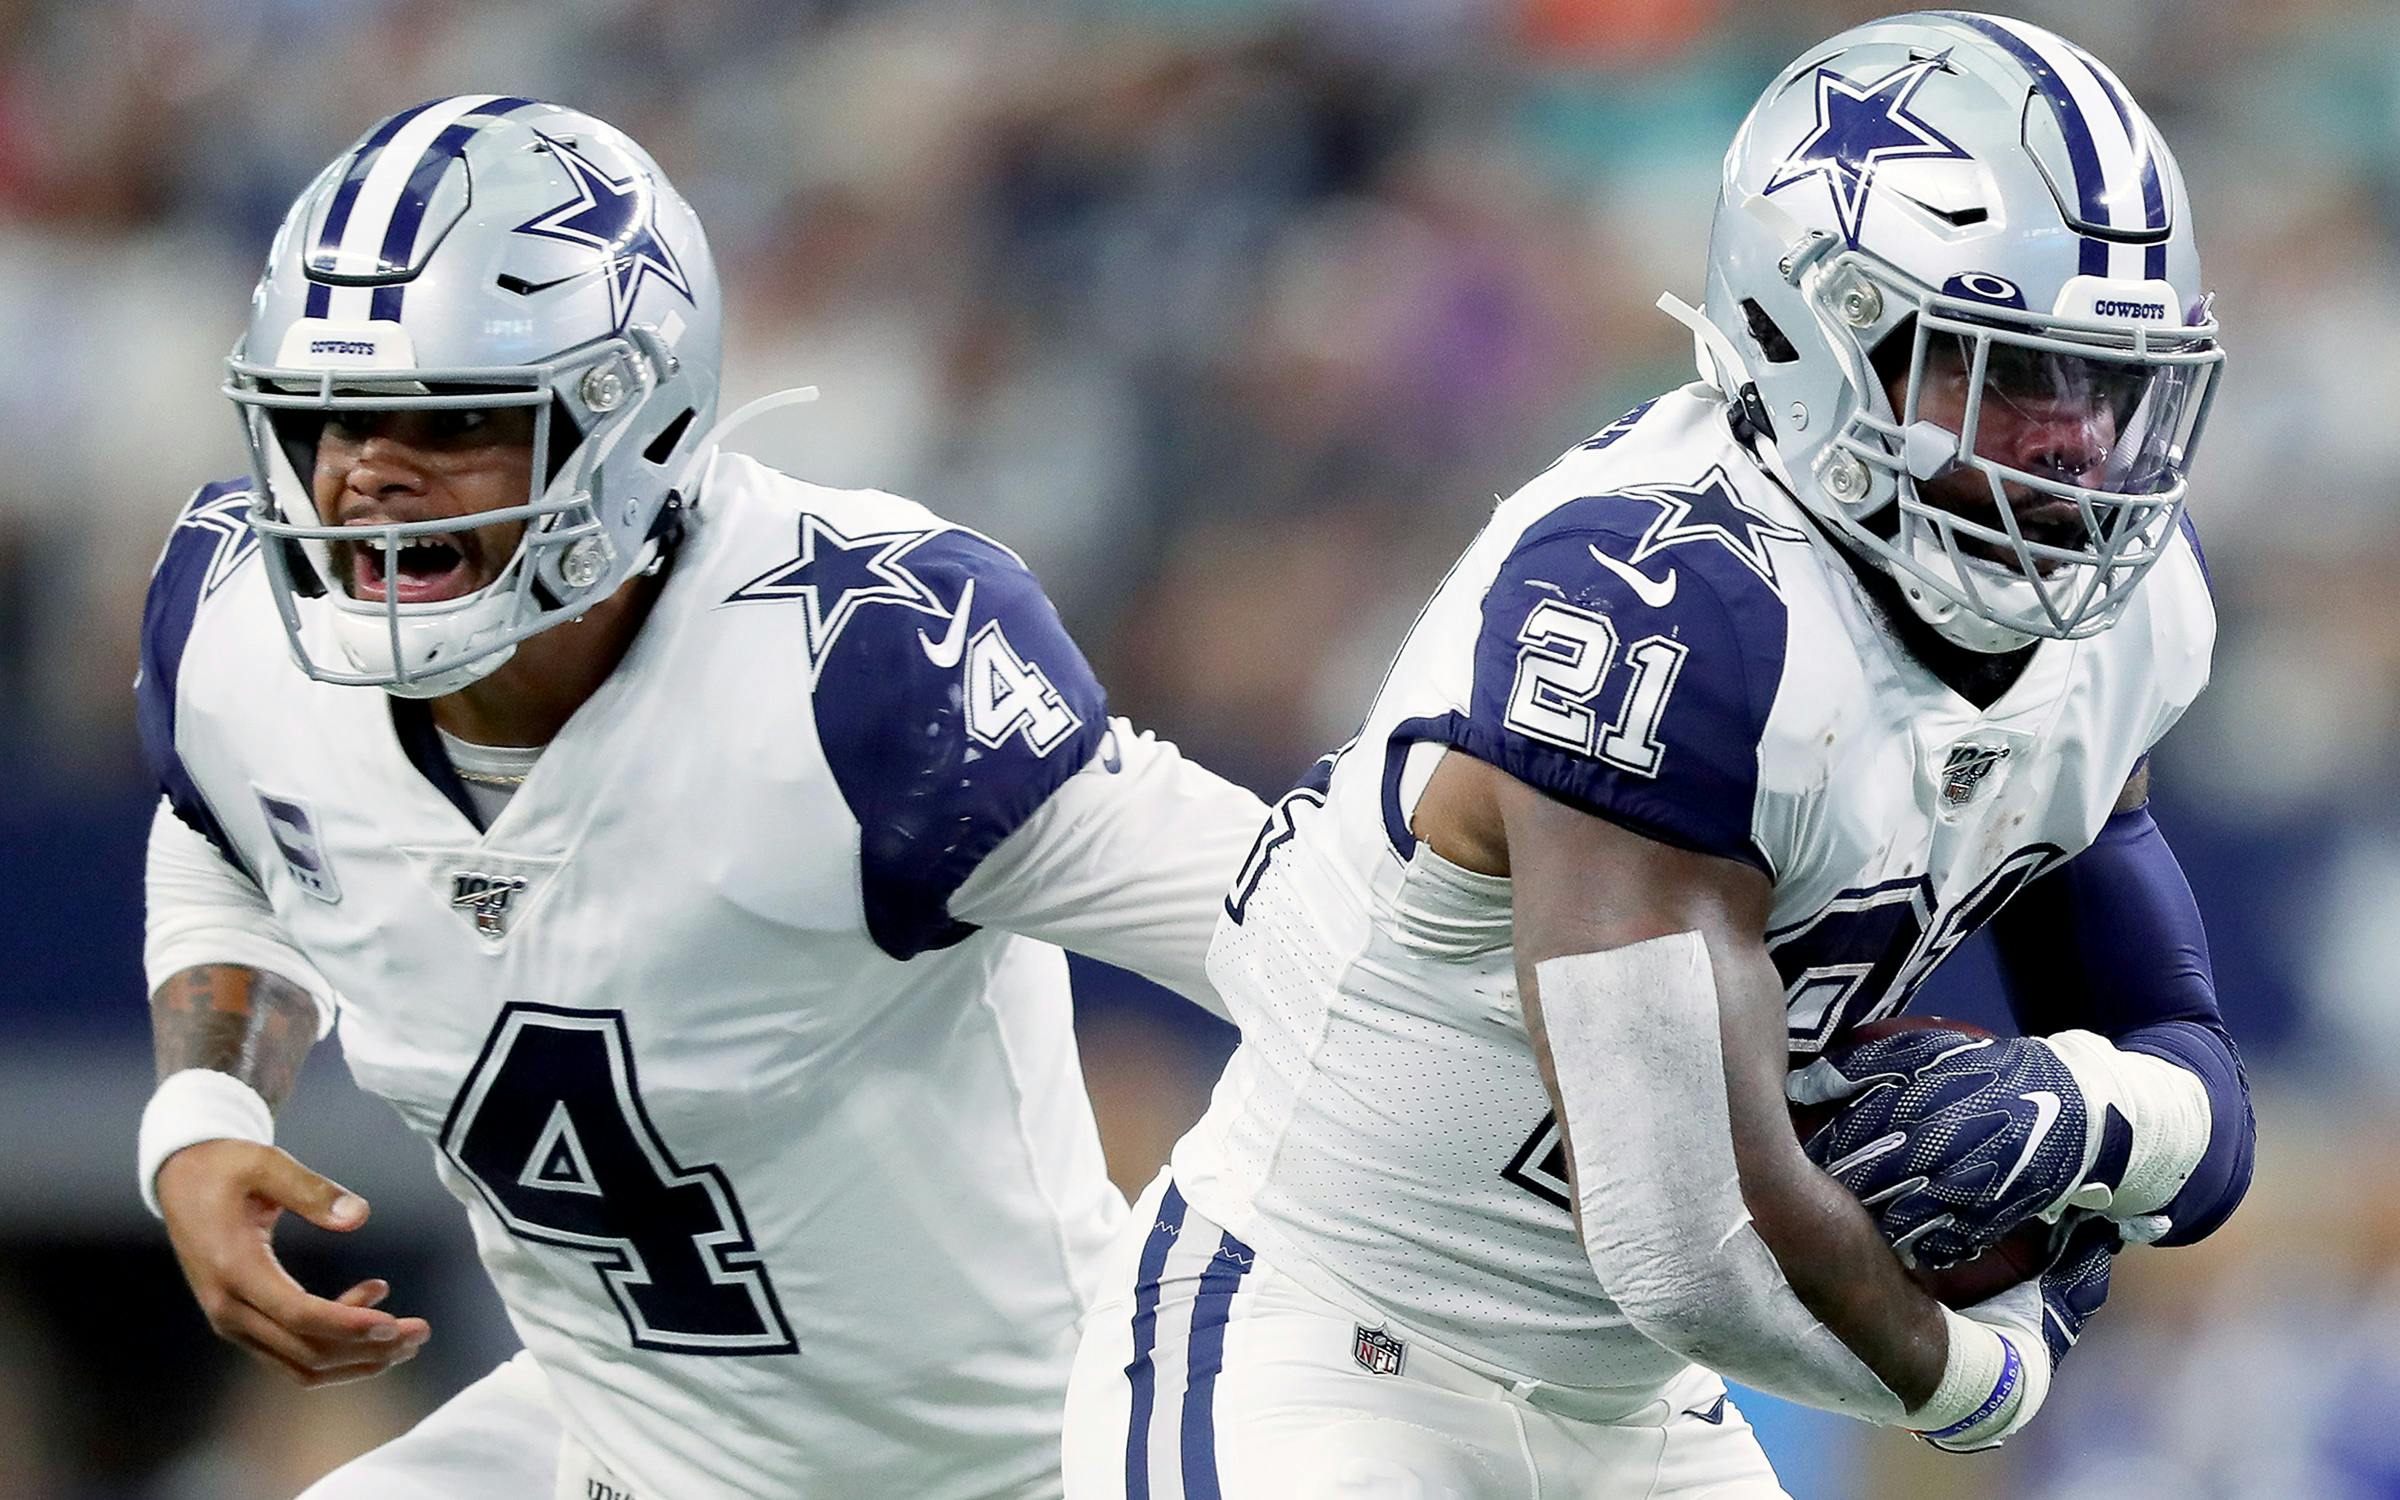 Cowboys have some history on their side in 2021 opener vs Buccaneers